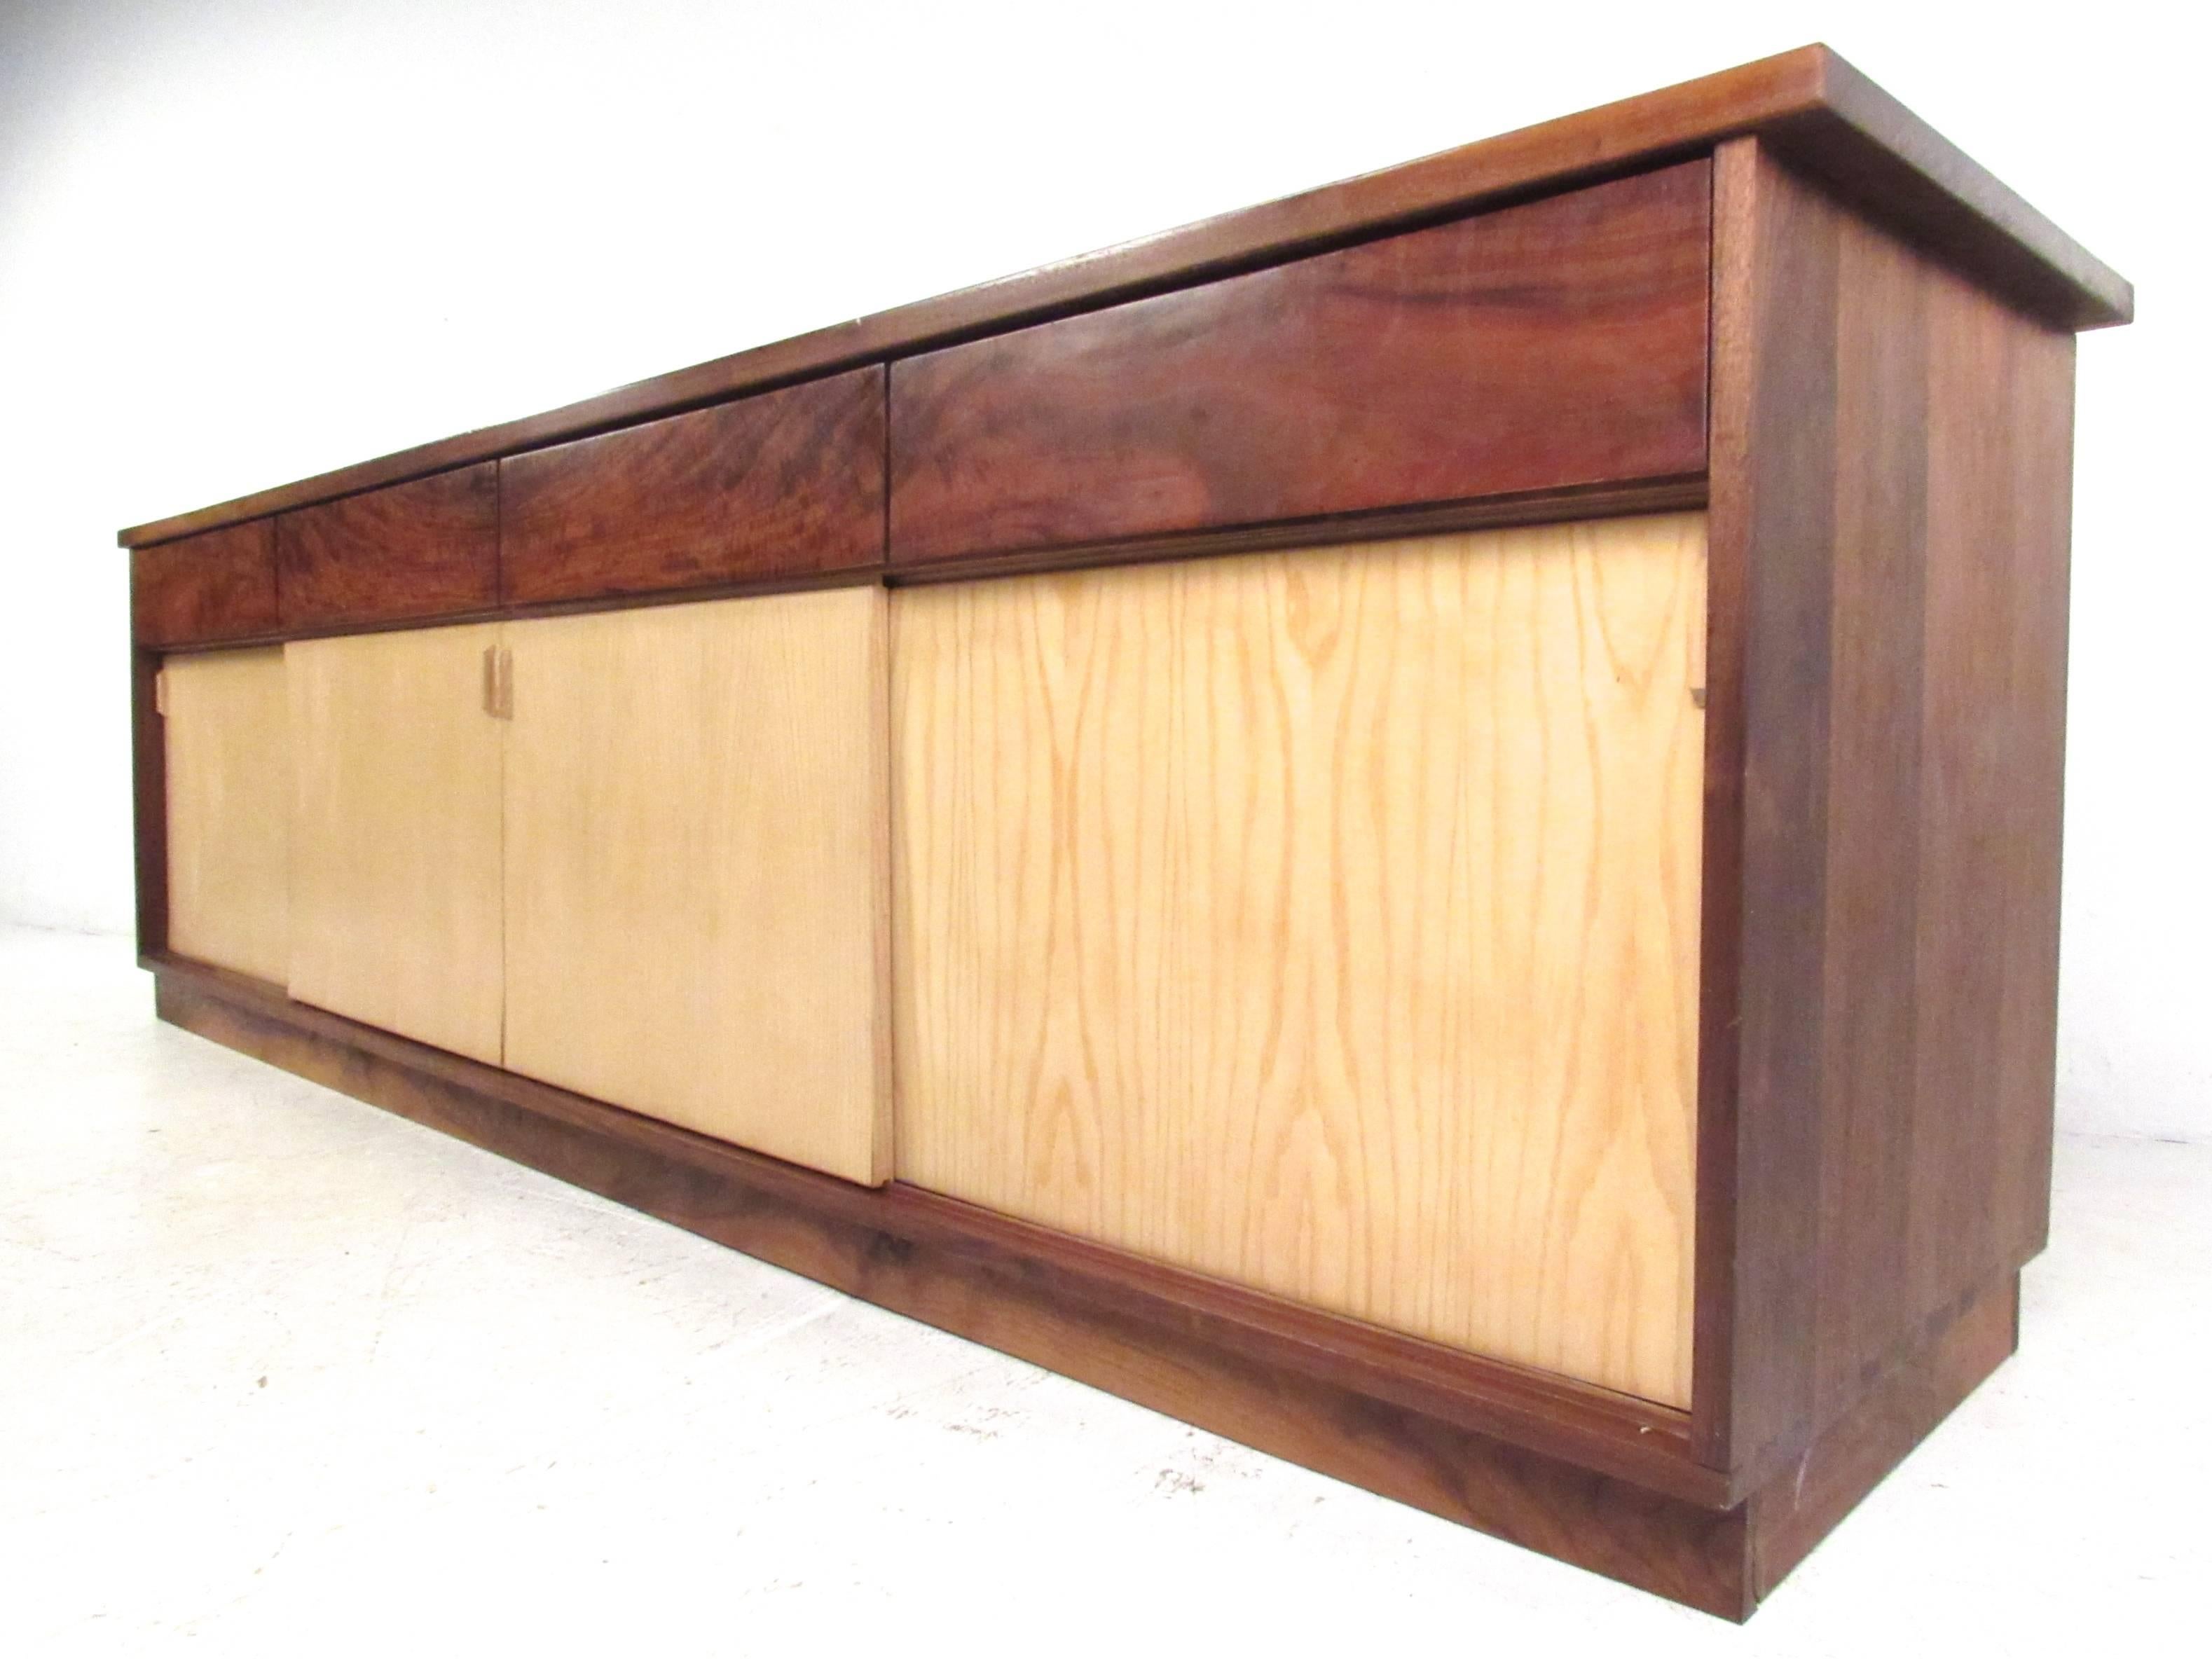 This stunning large-scale office credenza features beautiful two-tone construction, ample storage space and drawers for added storage. Beautiful rosewood finish contrasts wonderfully with the light finish sliding doors. Dovetail construction add to